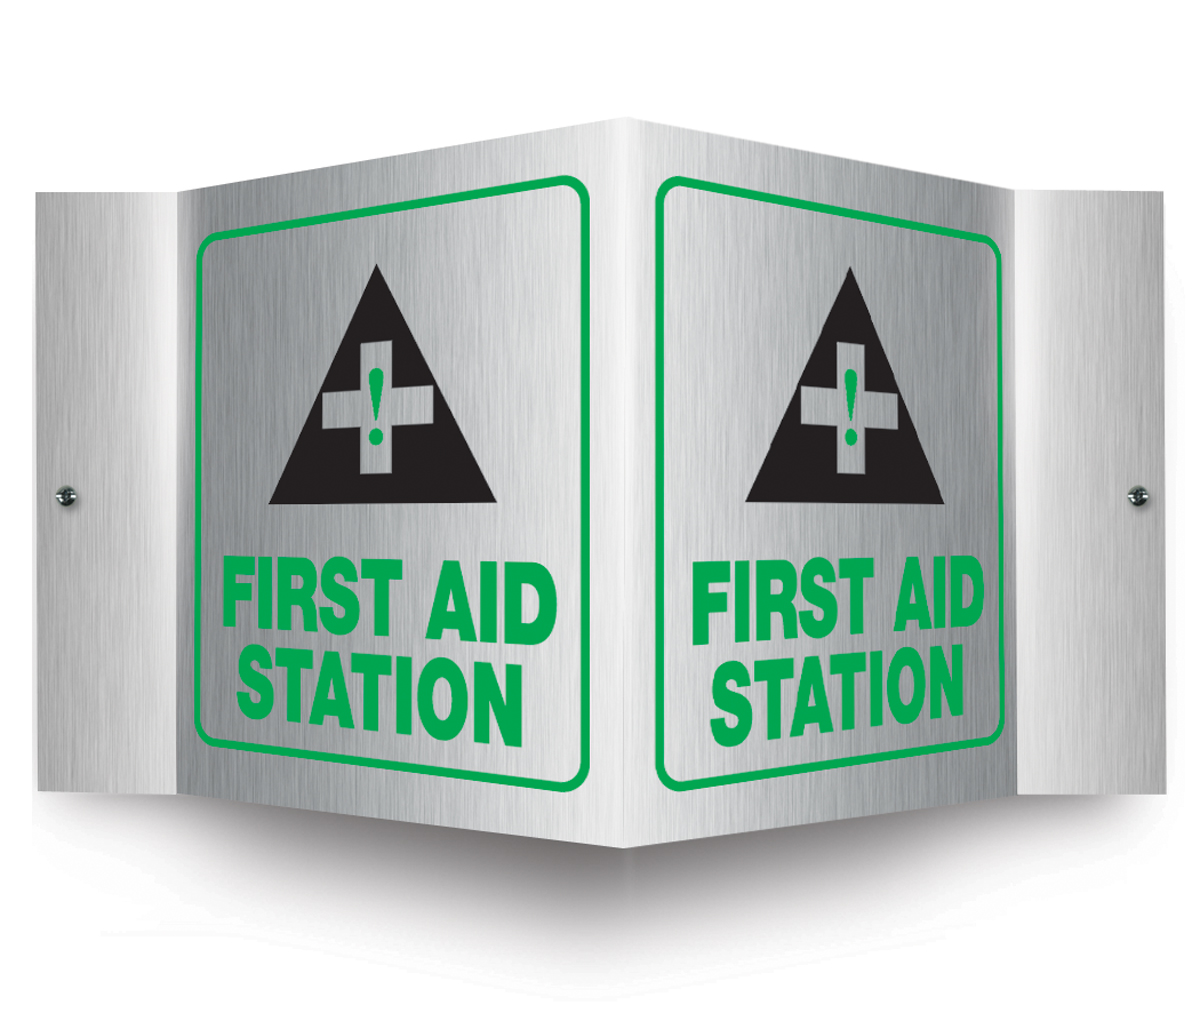 FIRST AID STATION W/GRAPHIC